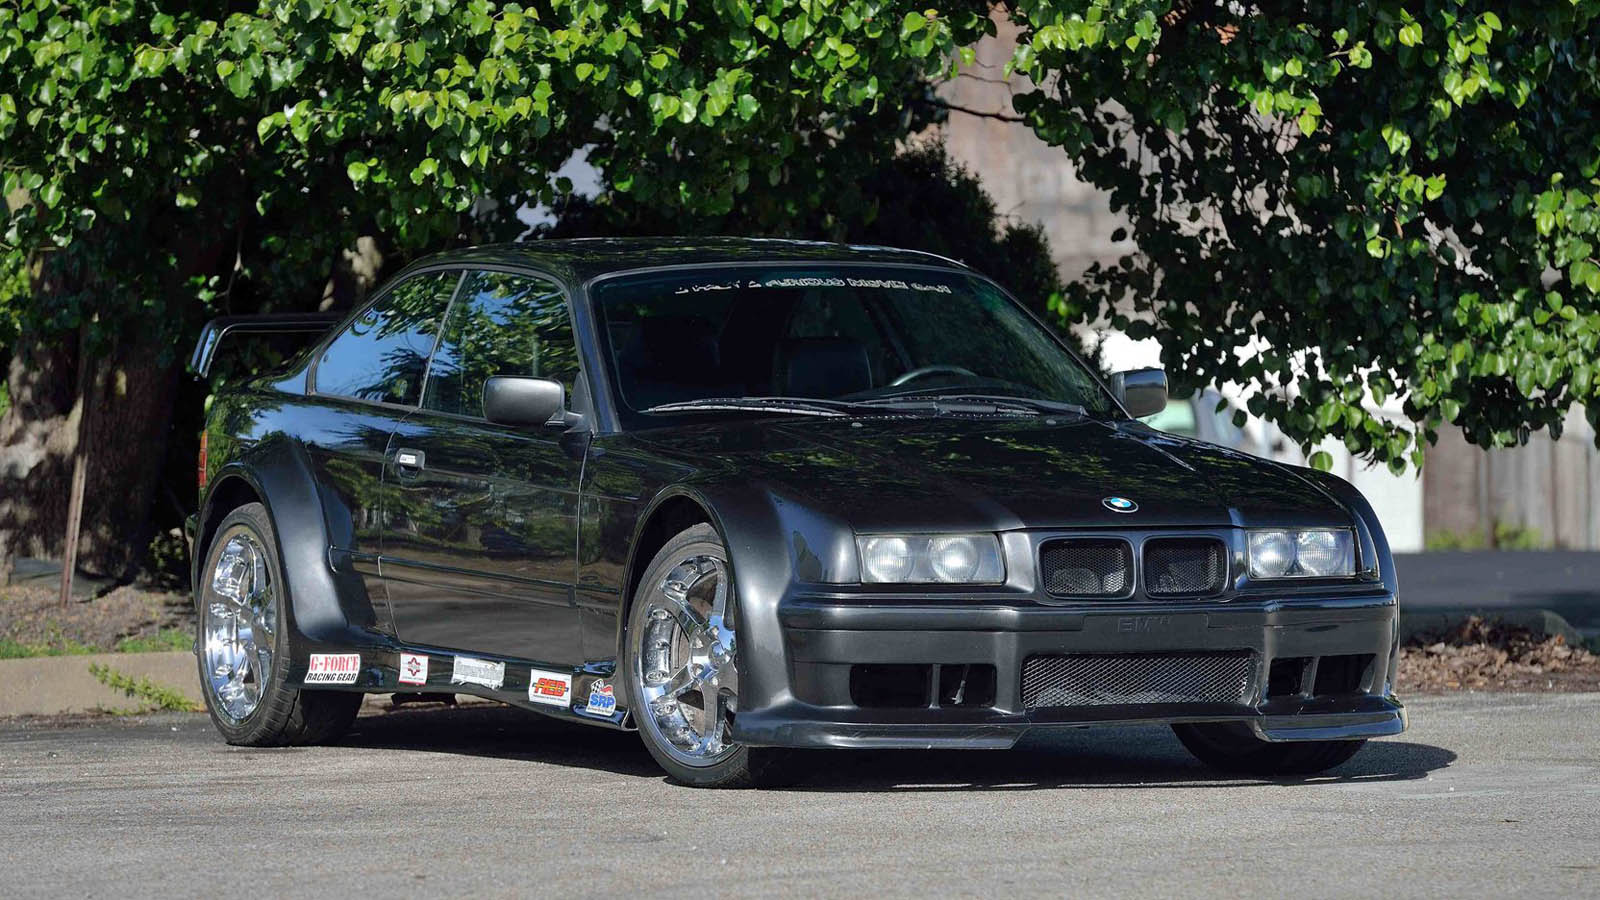 Nobody Wanted The BMW 323iS From 2 Fast 2 Furious Enough To Buy It | Carscoops